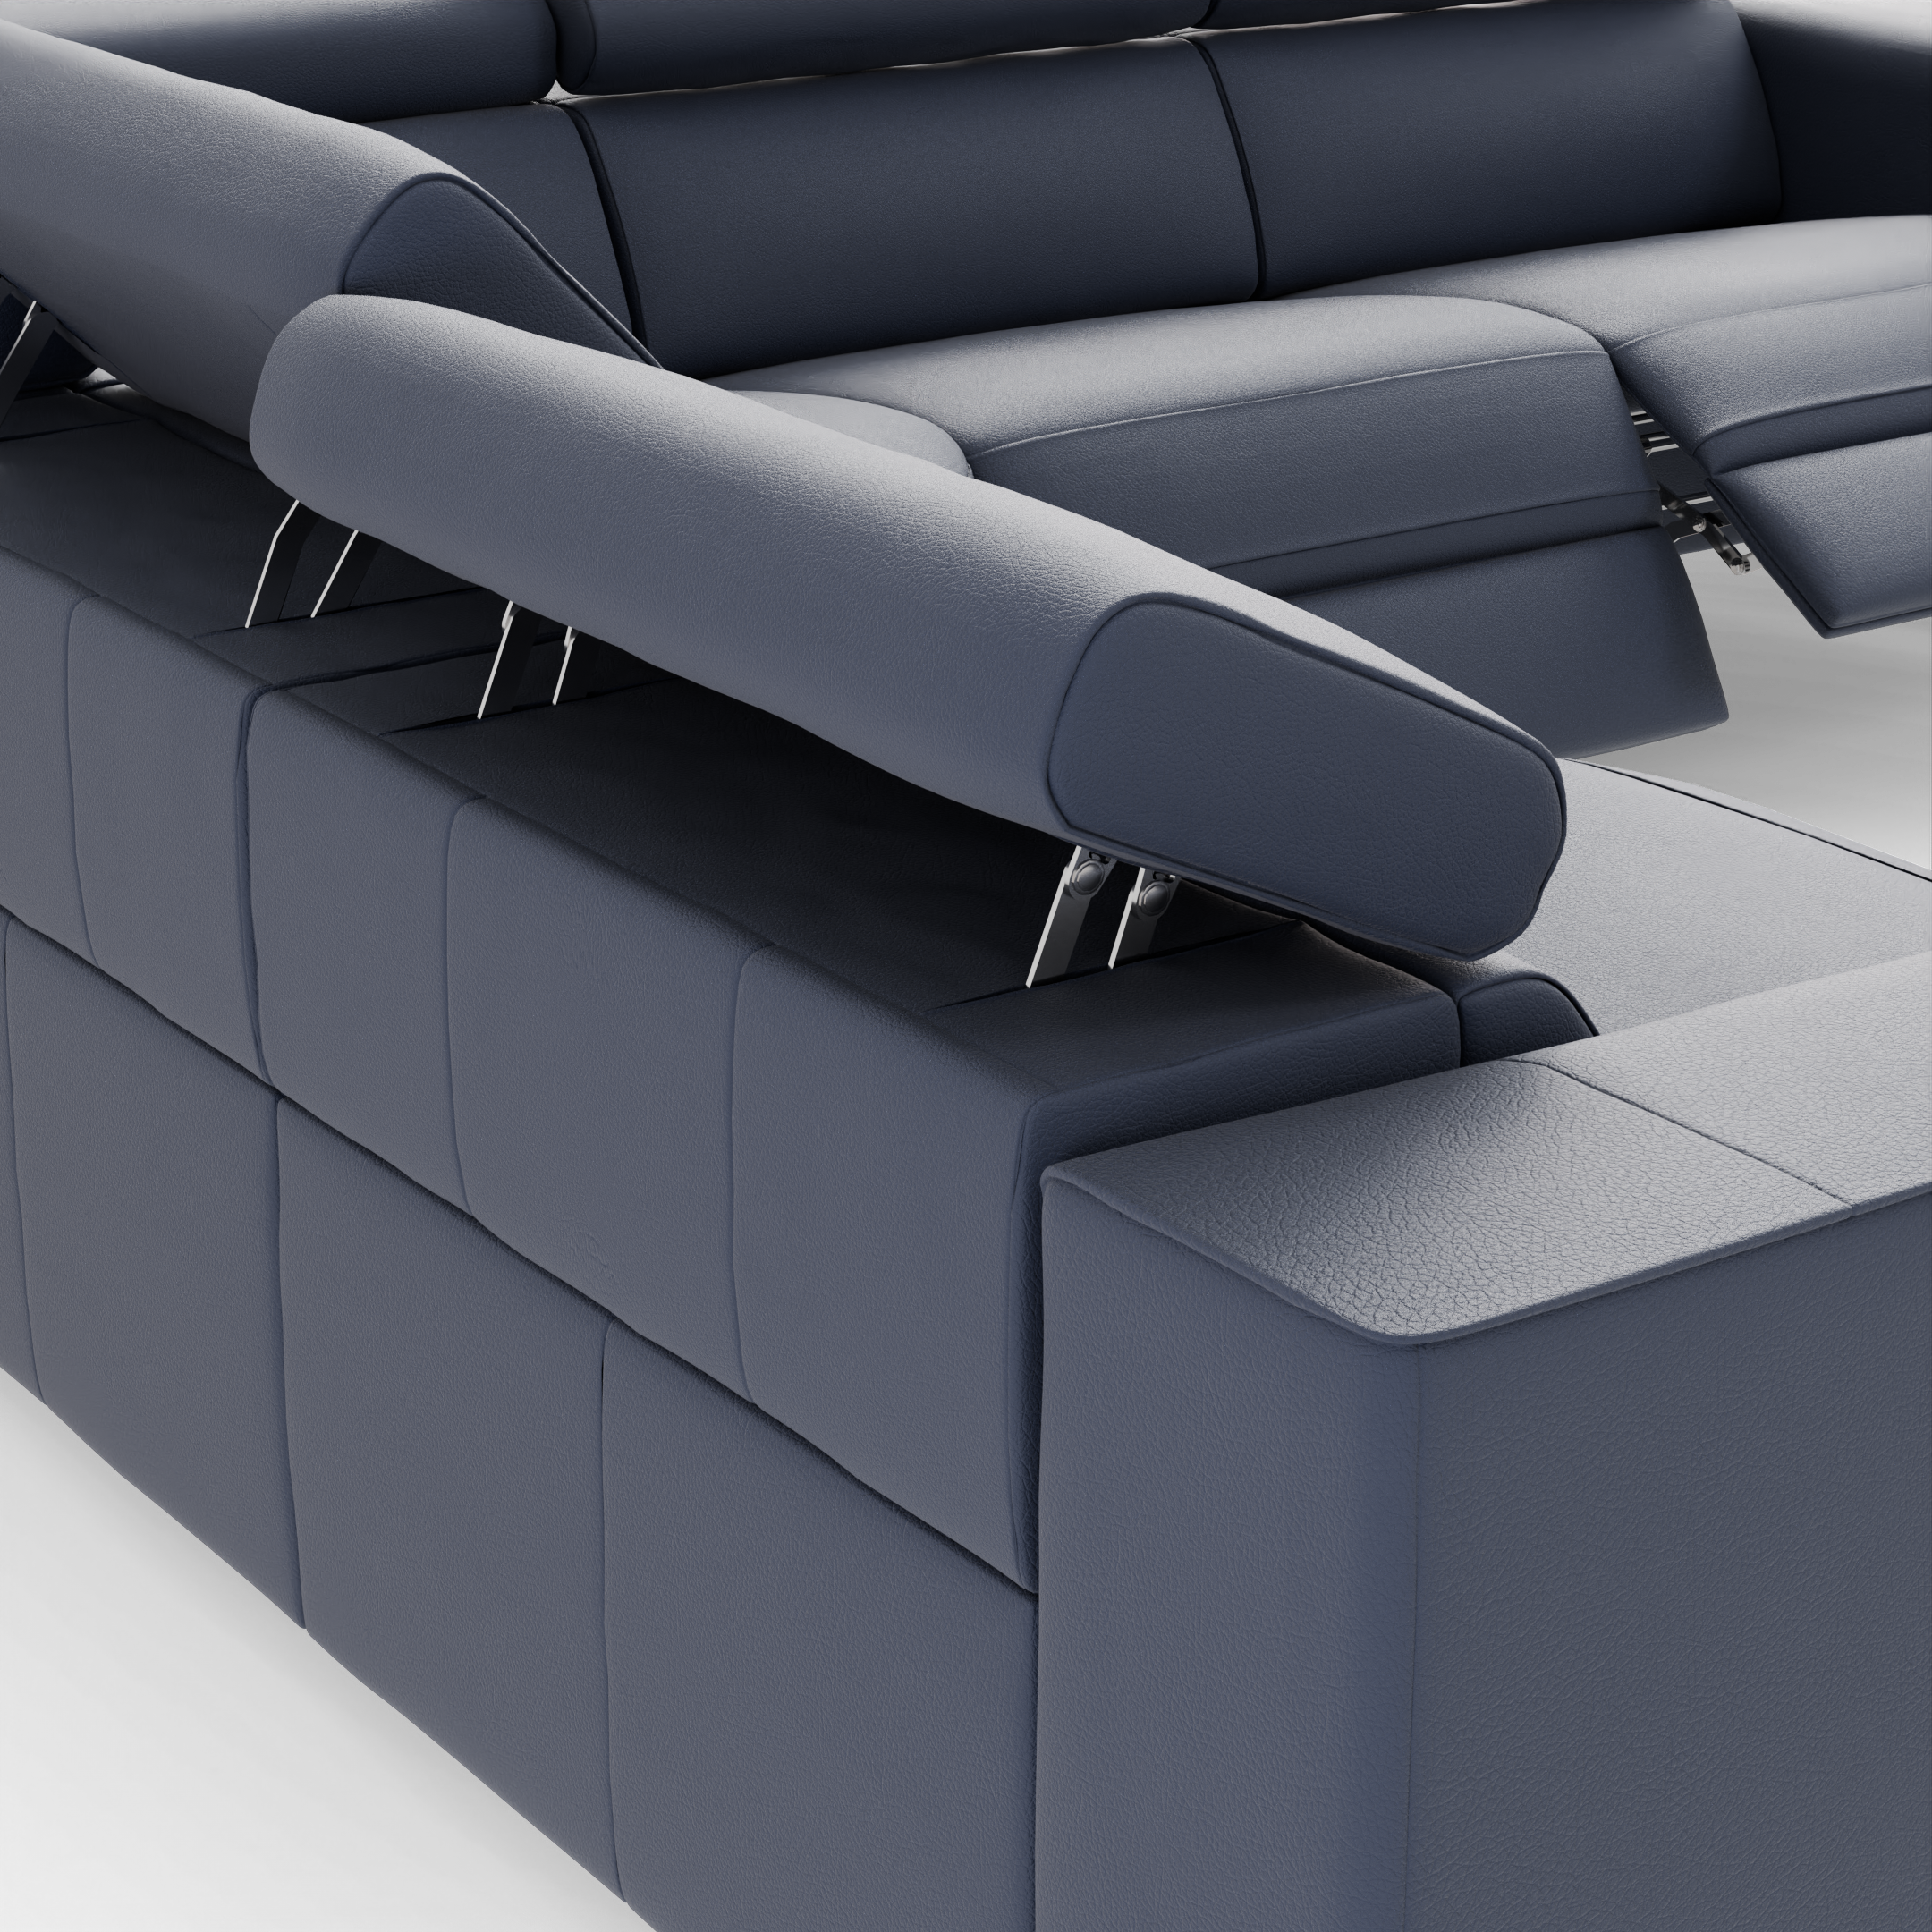 Dominio Sectional